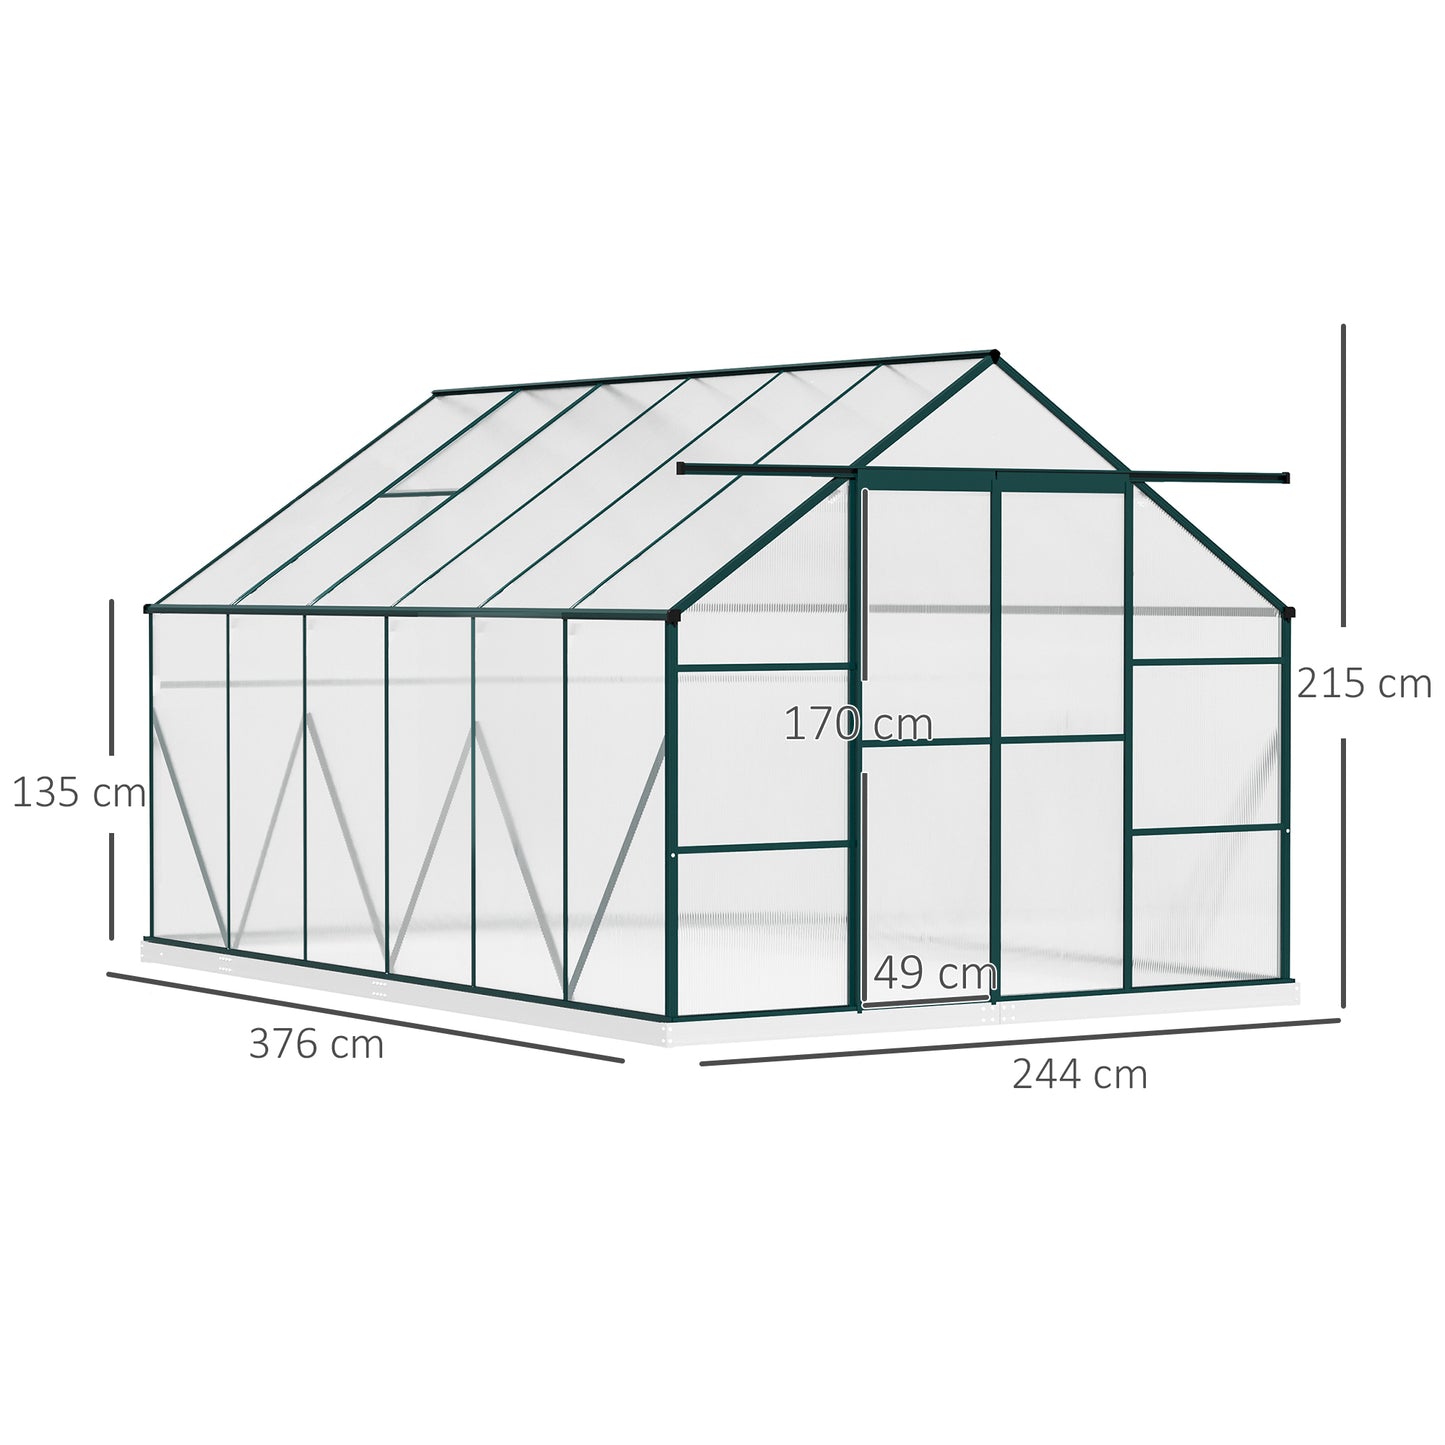 Outsunny Aluminium Greenhouse Polycarbonate Walk-in Garden Greenhouse Kit with Adjustable Roof Vent, Rain Gutter and Foundation, 8 x 12ft, Clear